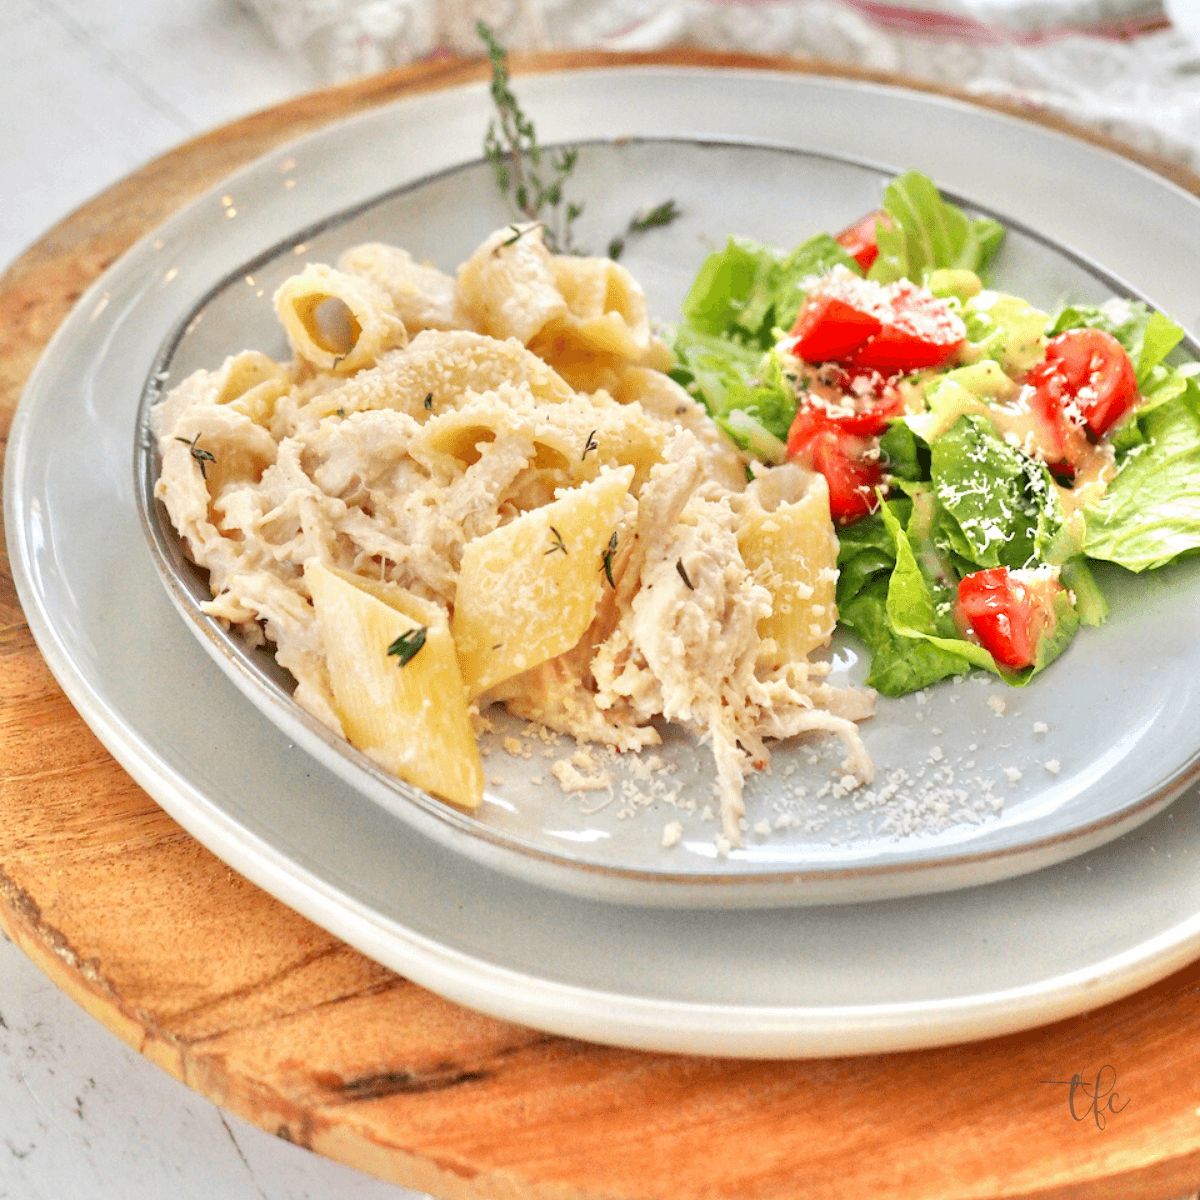 Olive Garden Crock Pot Chicken image with pasta on a plate with a green salad.